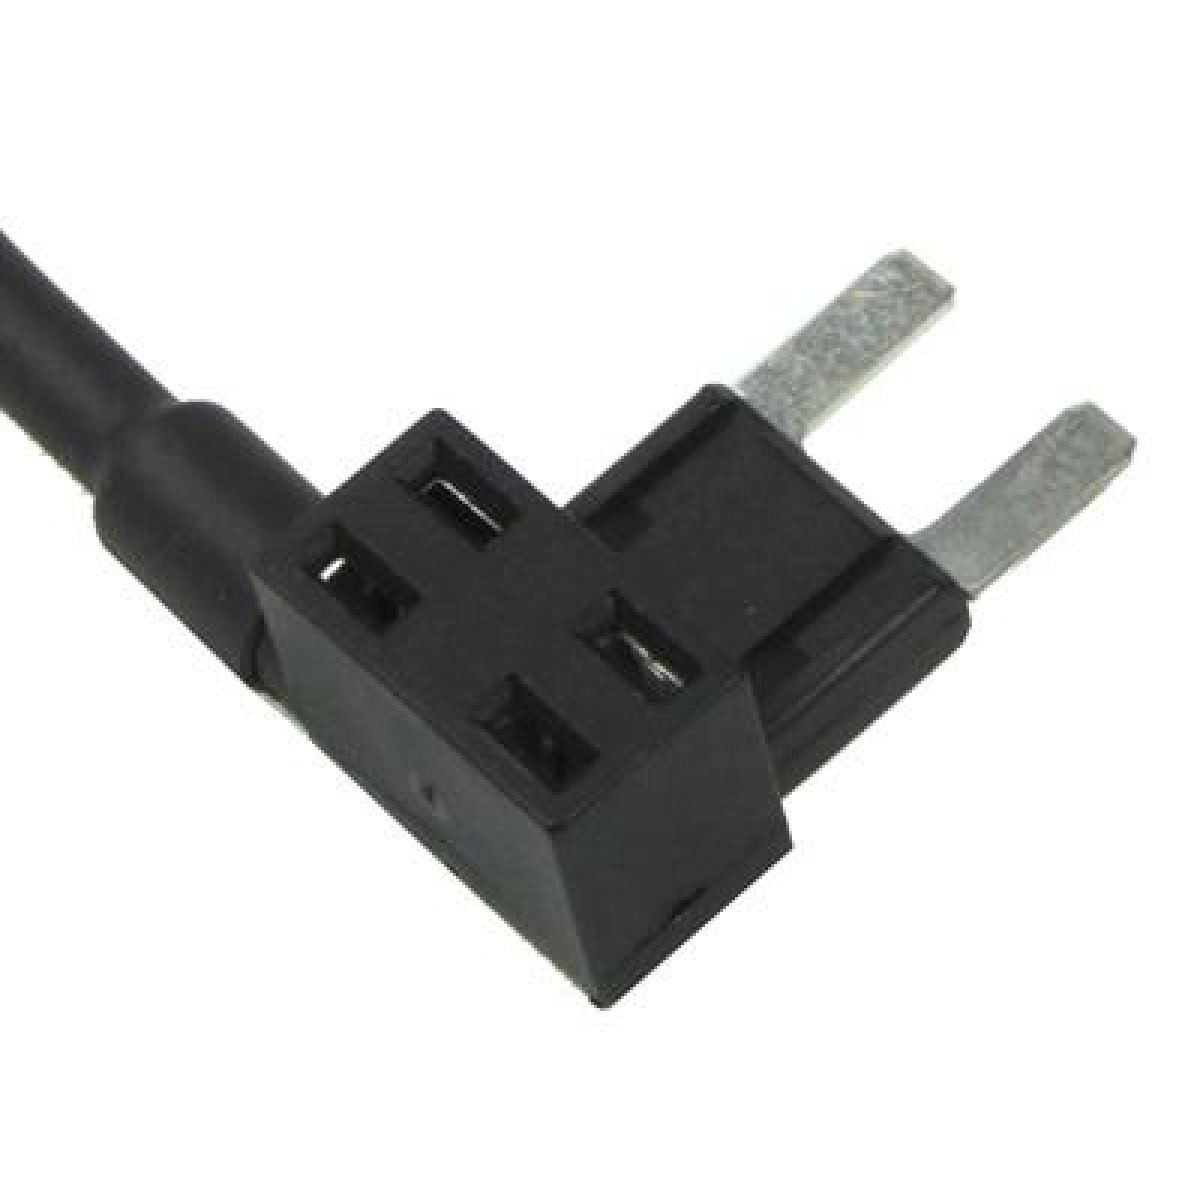 Add-A-Circuit TAP Adapter ATM APM Blade Auto Fuse Holder (Small Size)